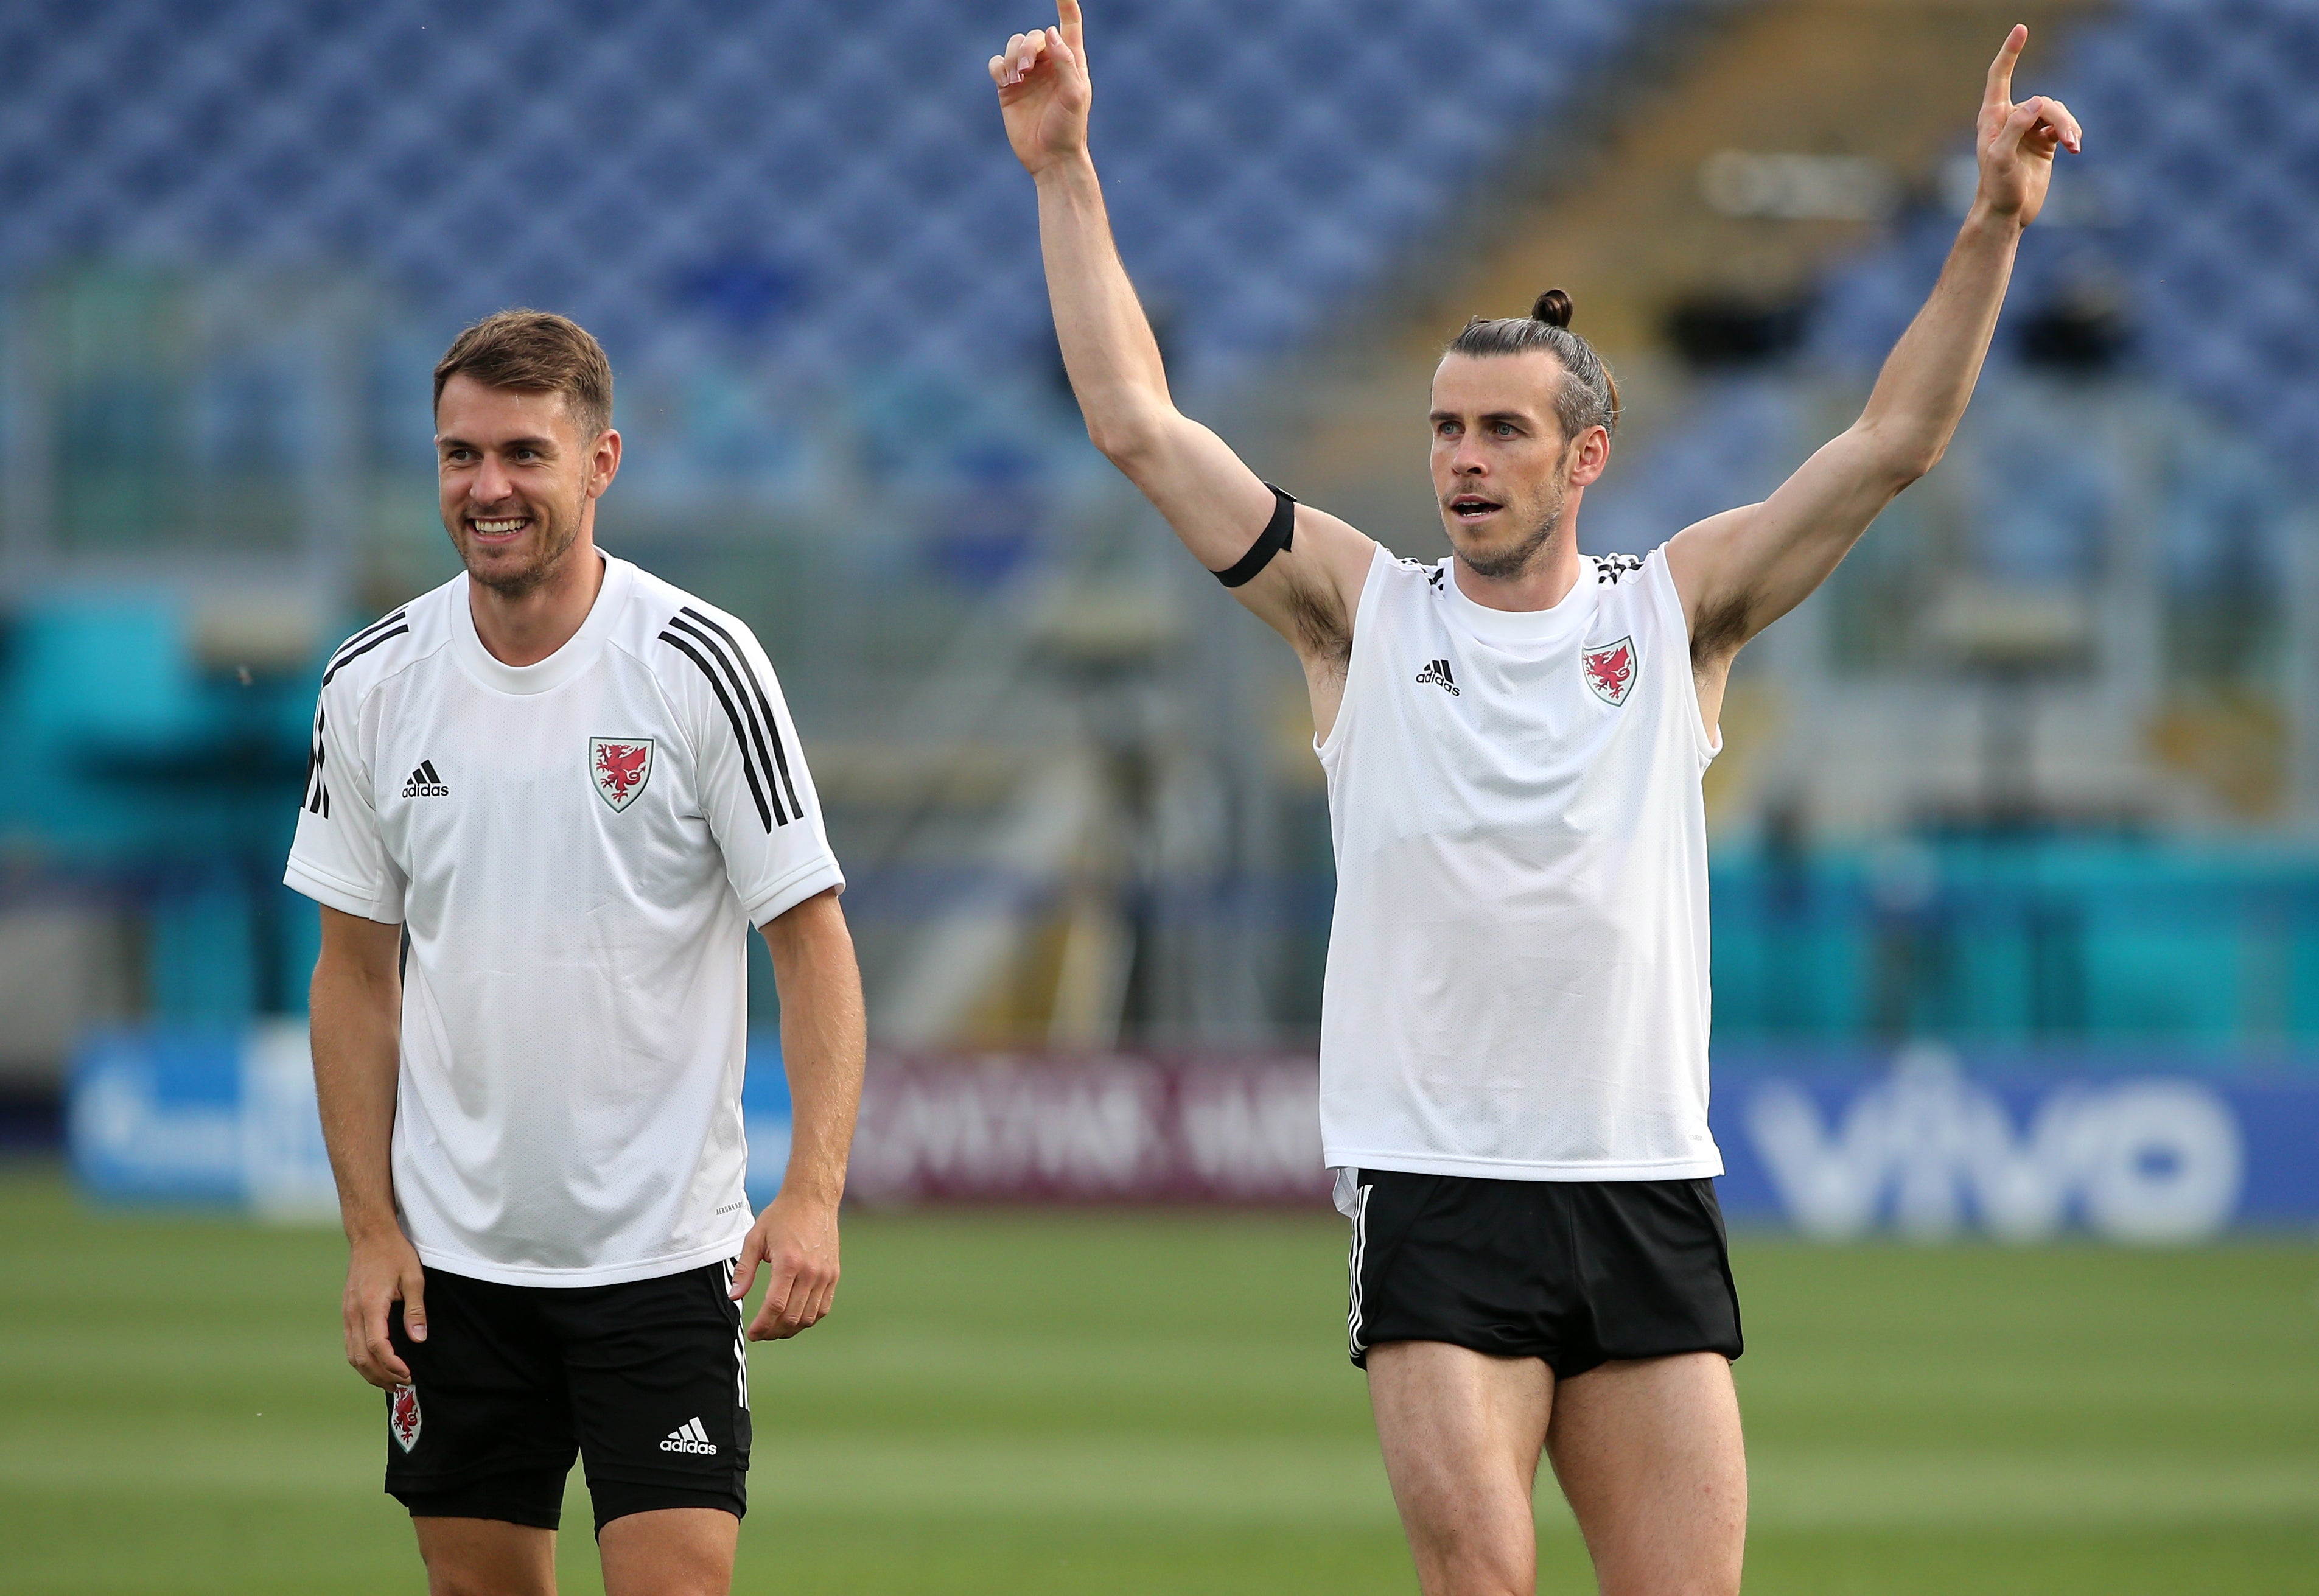 Aaron Ramsey (left) and Gareth Bale (right) are “fit and raring to go” for Wales’ World Cup play-off after injury-hit seasons says manager Robert Page (Marco Iacobucci/PA)